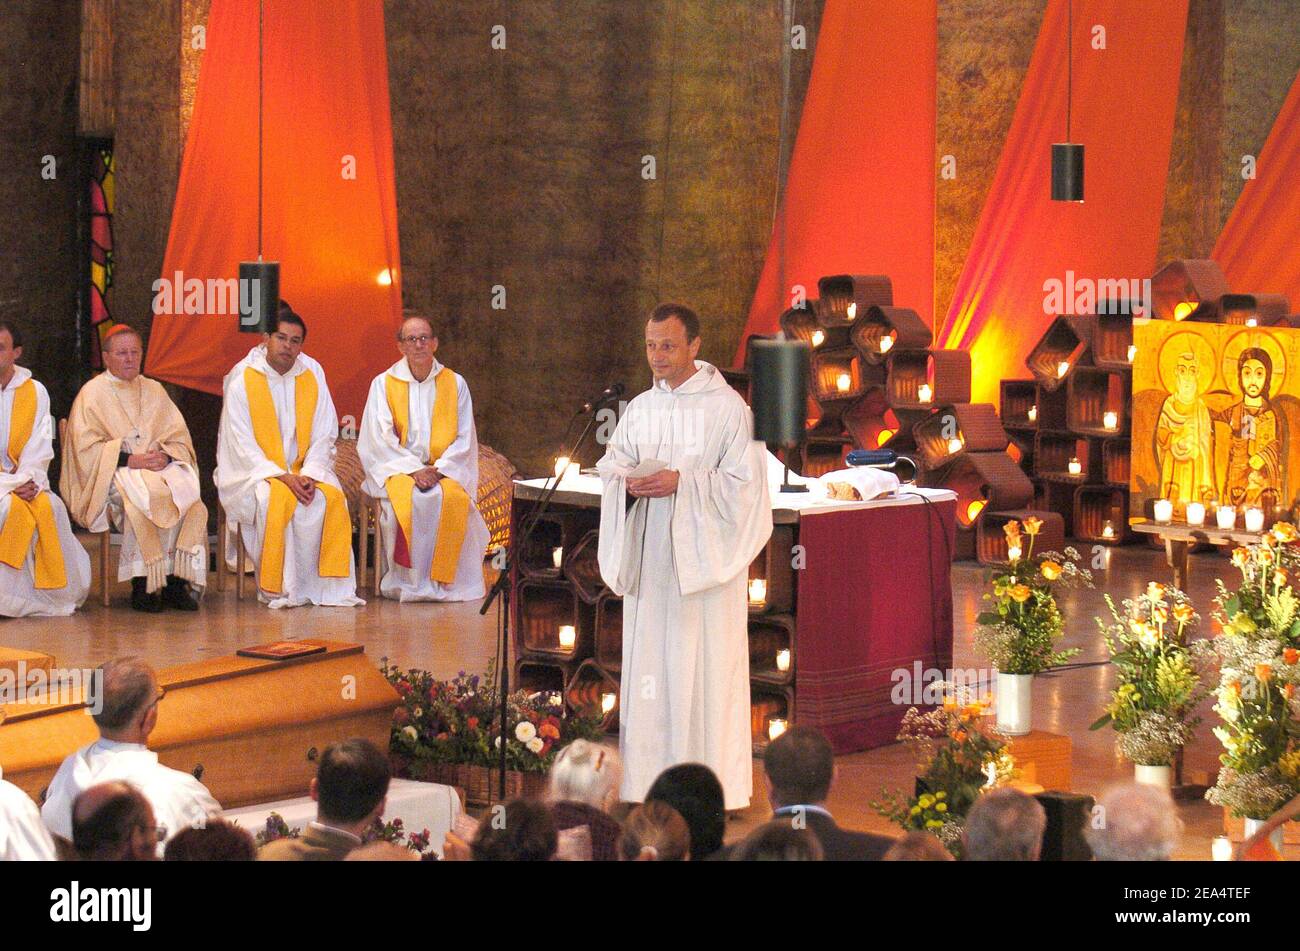 Brother Alois holds the funeral service for Brother Roger Schutz, the leader of the Taize ecumenical community, at the community's Reconciliation church in Taize, central France, on August 23, 2005. Brother Roger, 90, was slain last week when a 36-year-old mentally disturbed Romanian woman slit his throat in front of 2,500 pilgrims praying at the church. Brother Alois succeds to Brother Roger at the head of the community. Photo by Bruno Klein/ABACAPRESS.COM Stock Photo